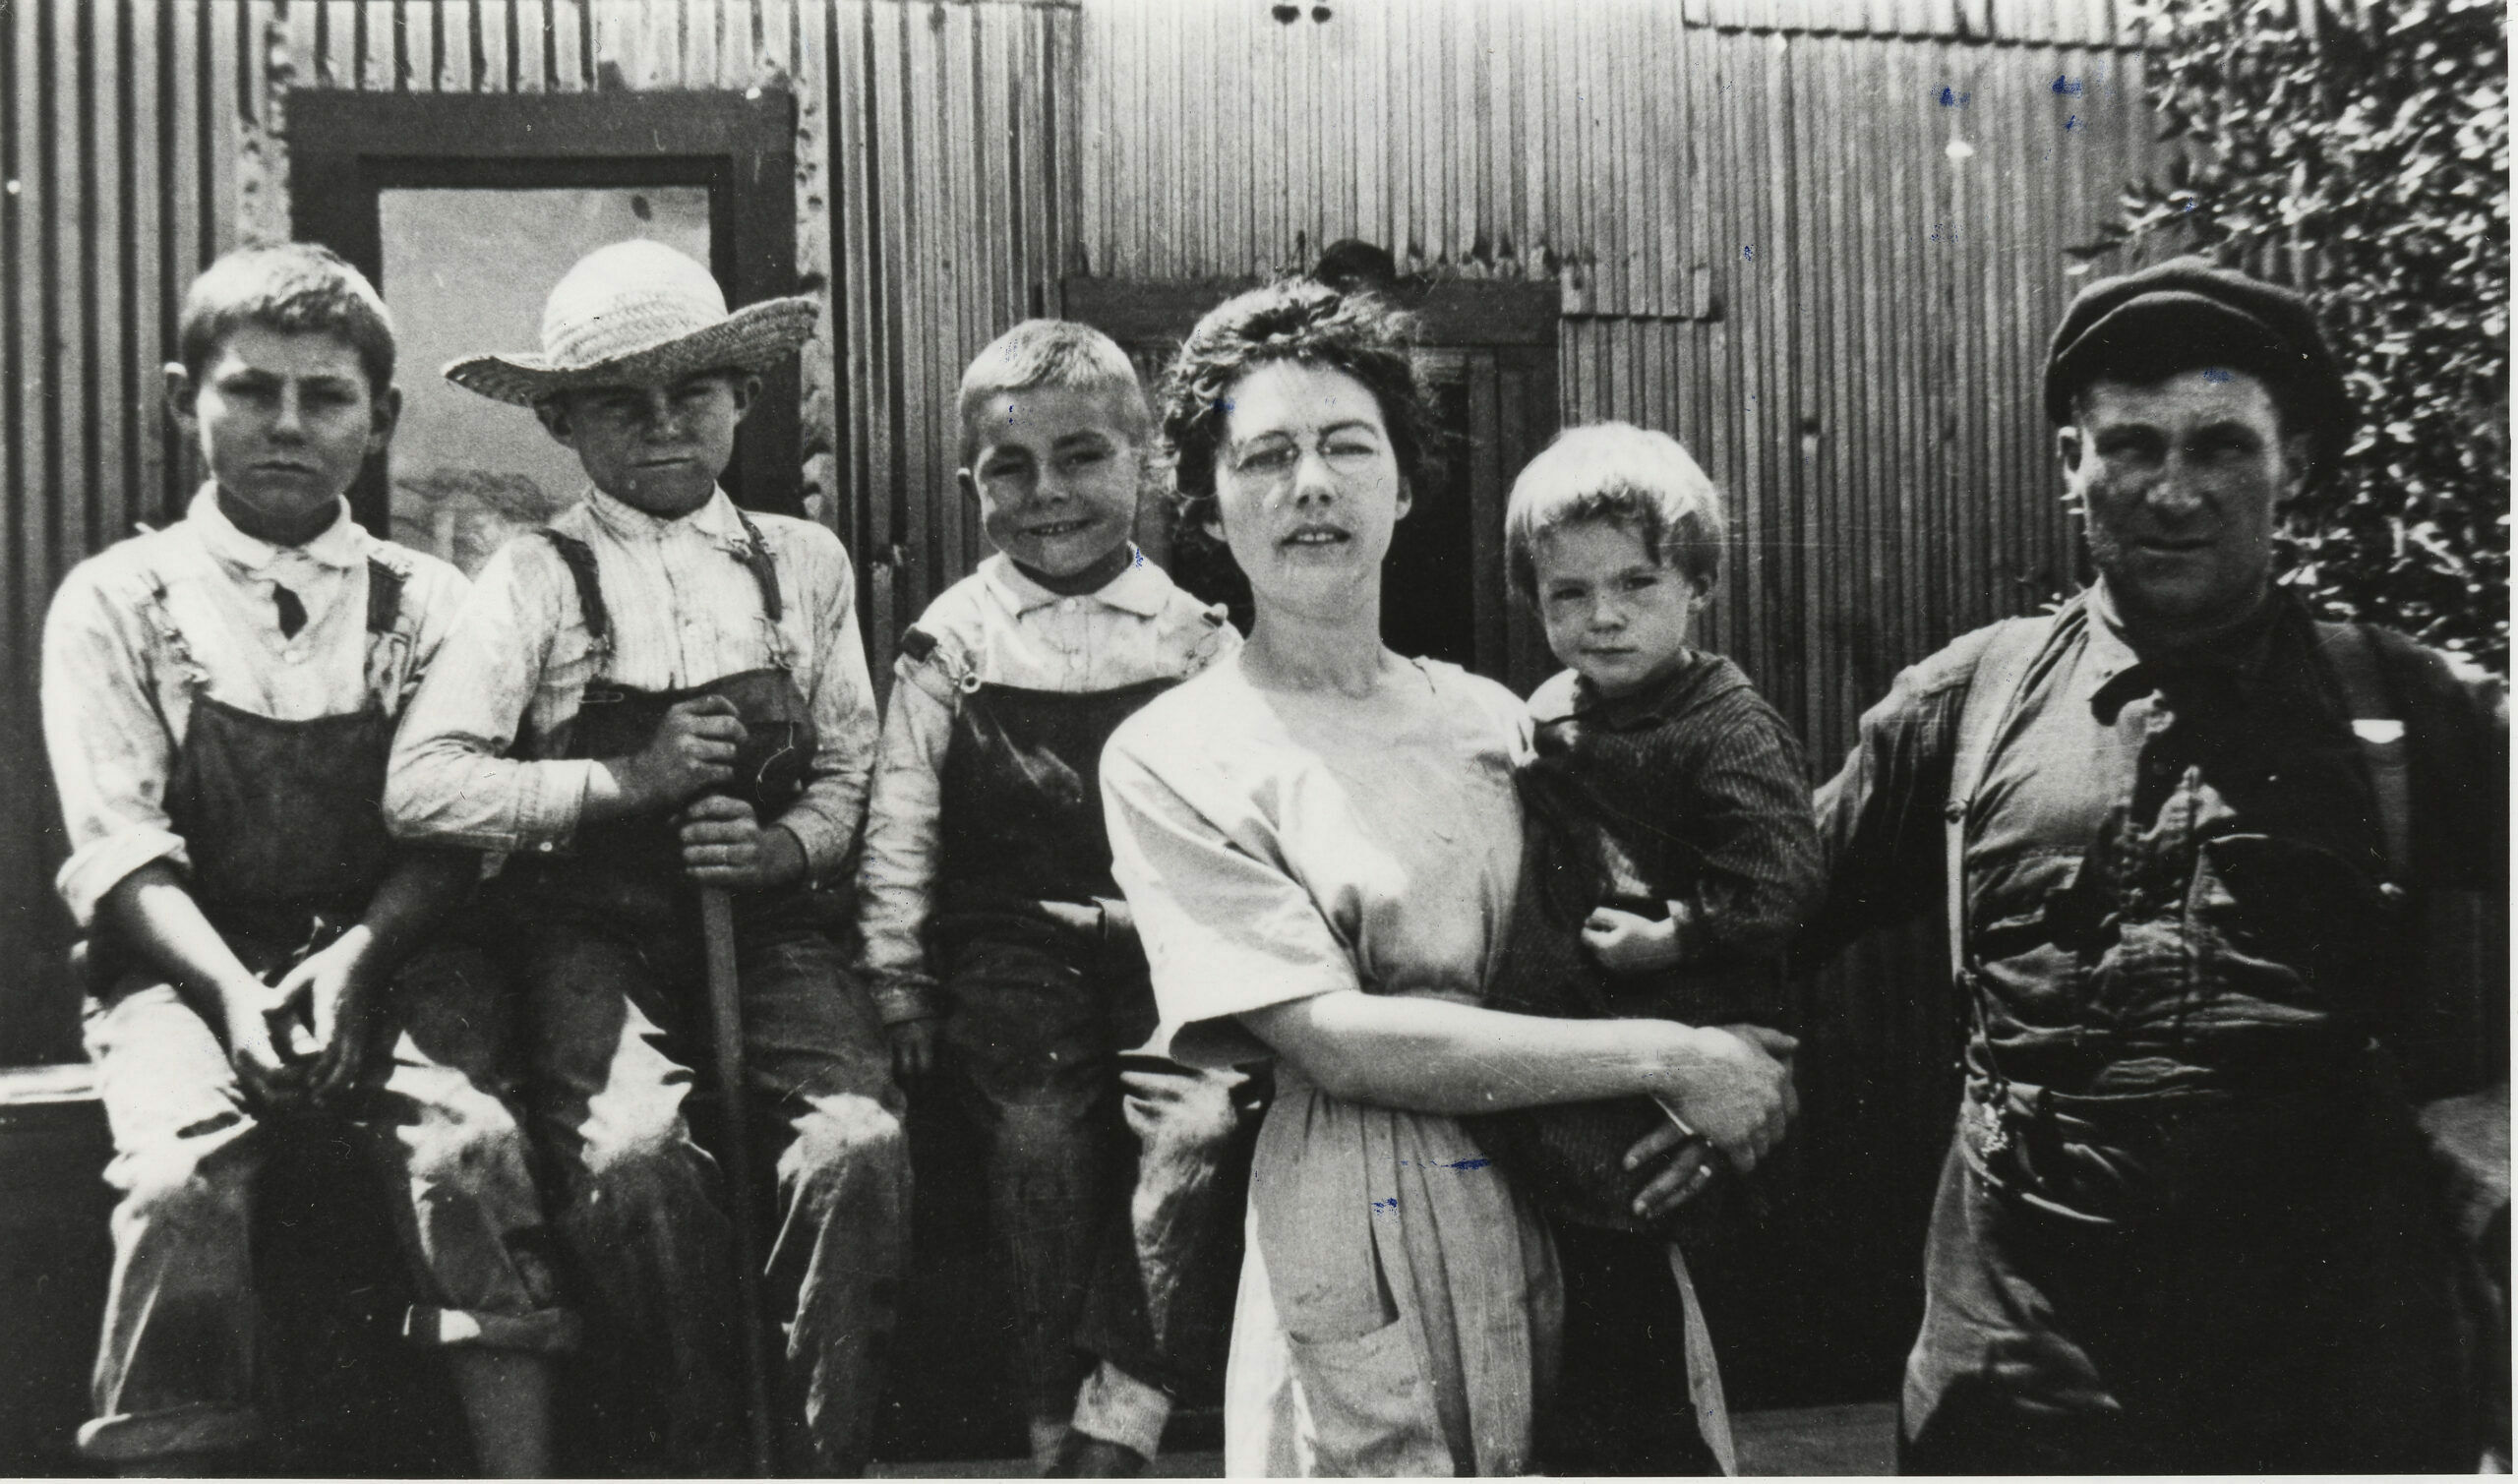 ca. 1918 – A. B. Stein is now a Master Mechanic, and is pictured with his family in front of their house in Smeltertown. Pictured from left to right: •    Walter, age 10 •    Alfred, age 8 •    Martin, age 6 •    Frances age 2